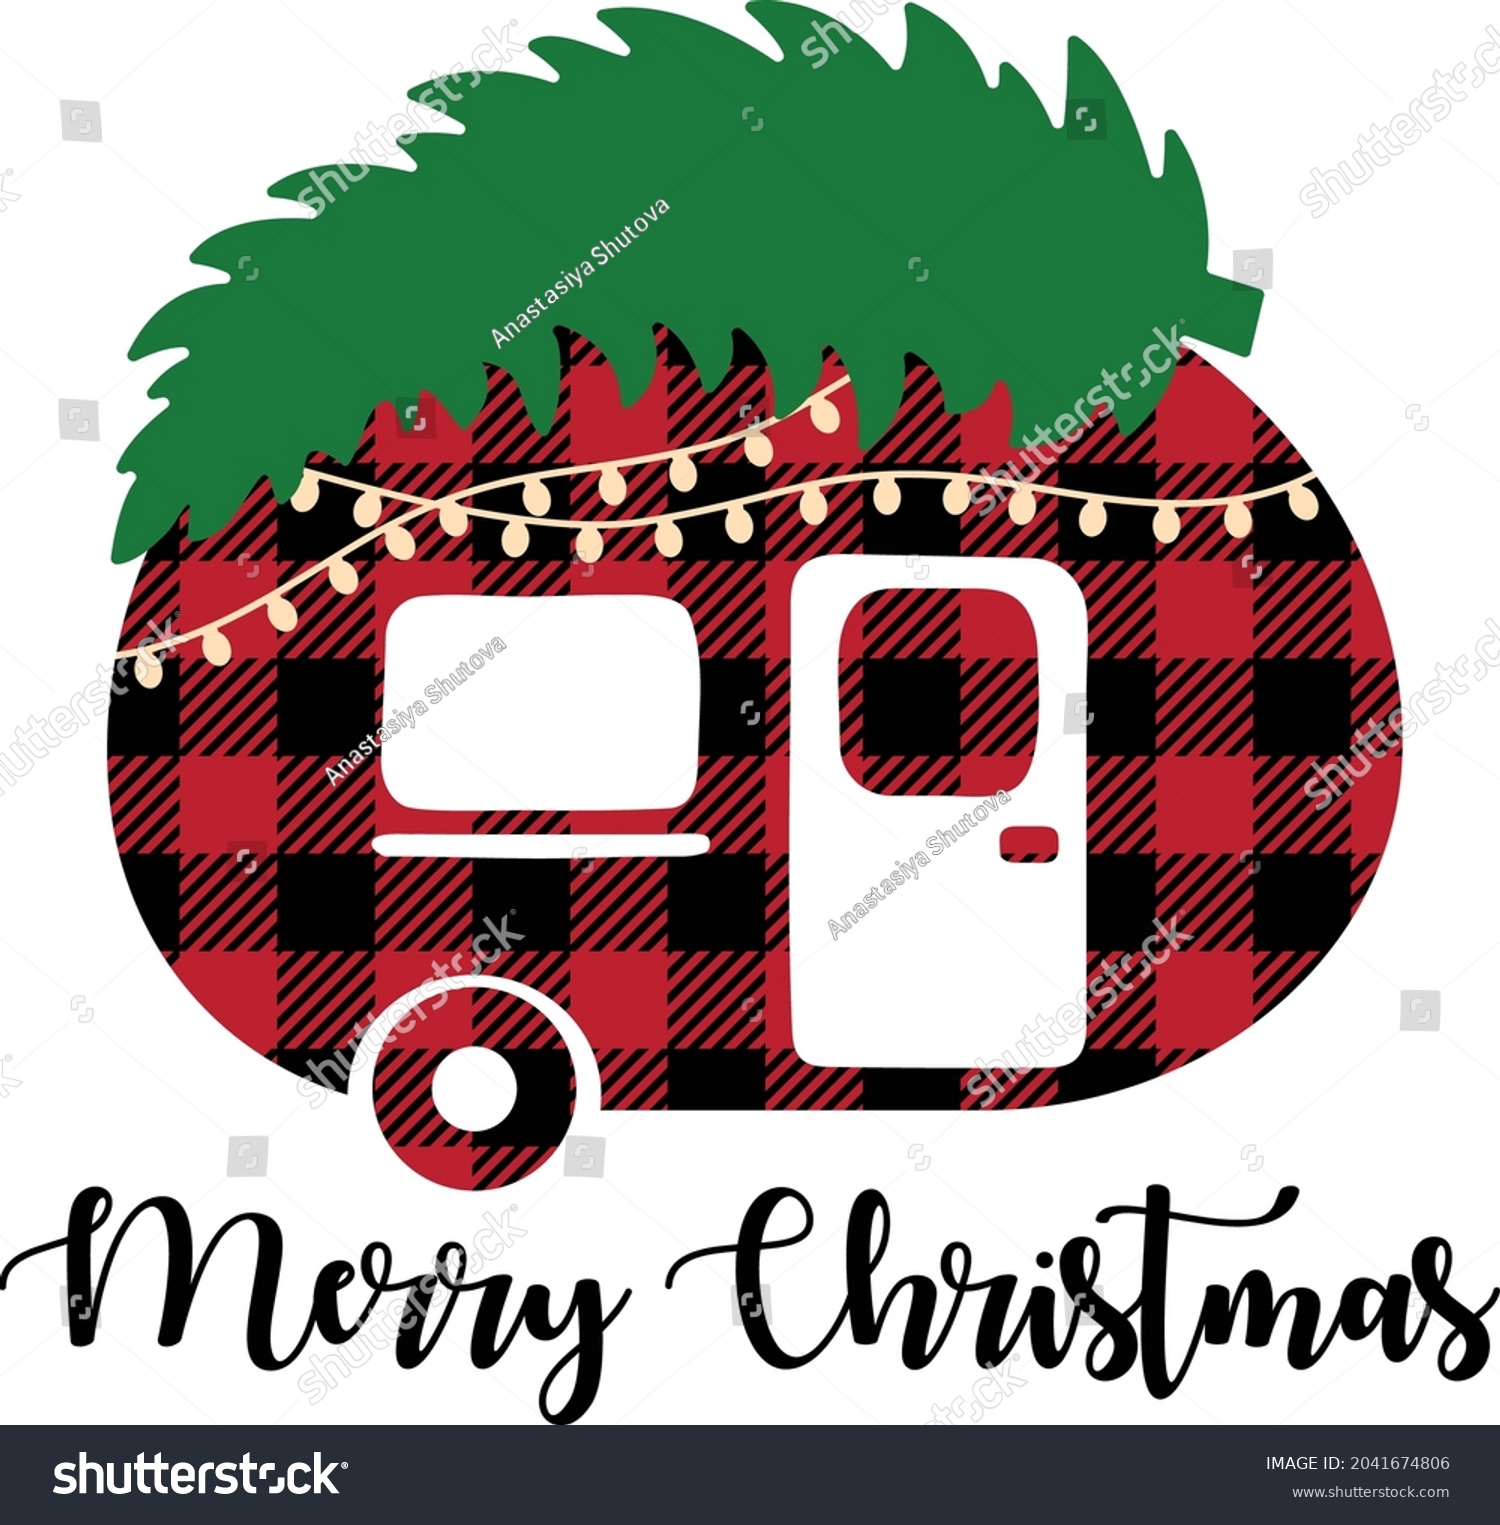 SVG of Buffalo plaid Christmas camp car Svg cut file. Merry Christmas vector illustration isolated on white background. Perfect for shirts, cards, mugs and so on. Christmas camper with tree and garland svg